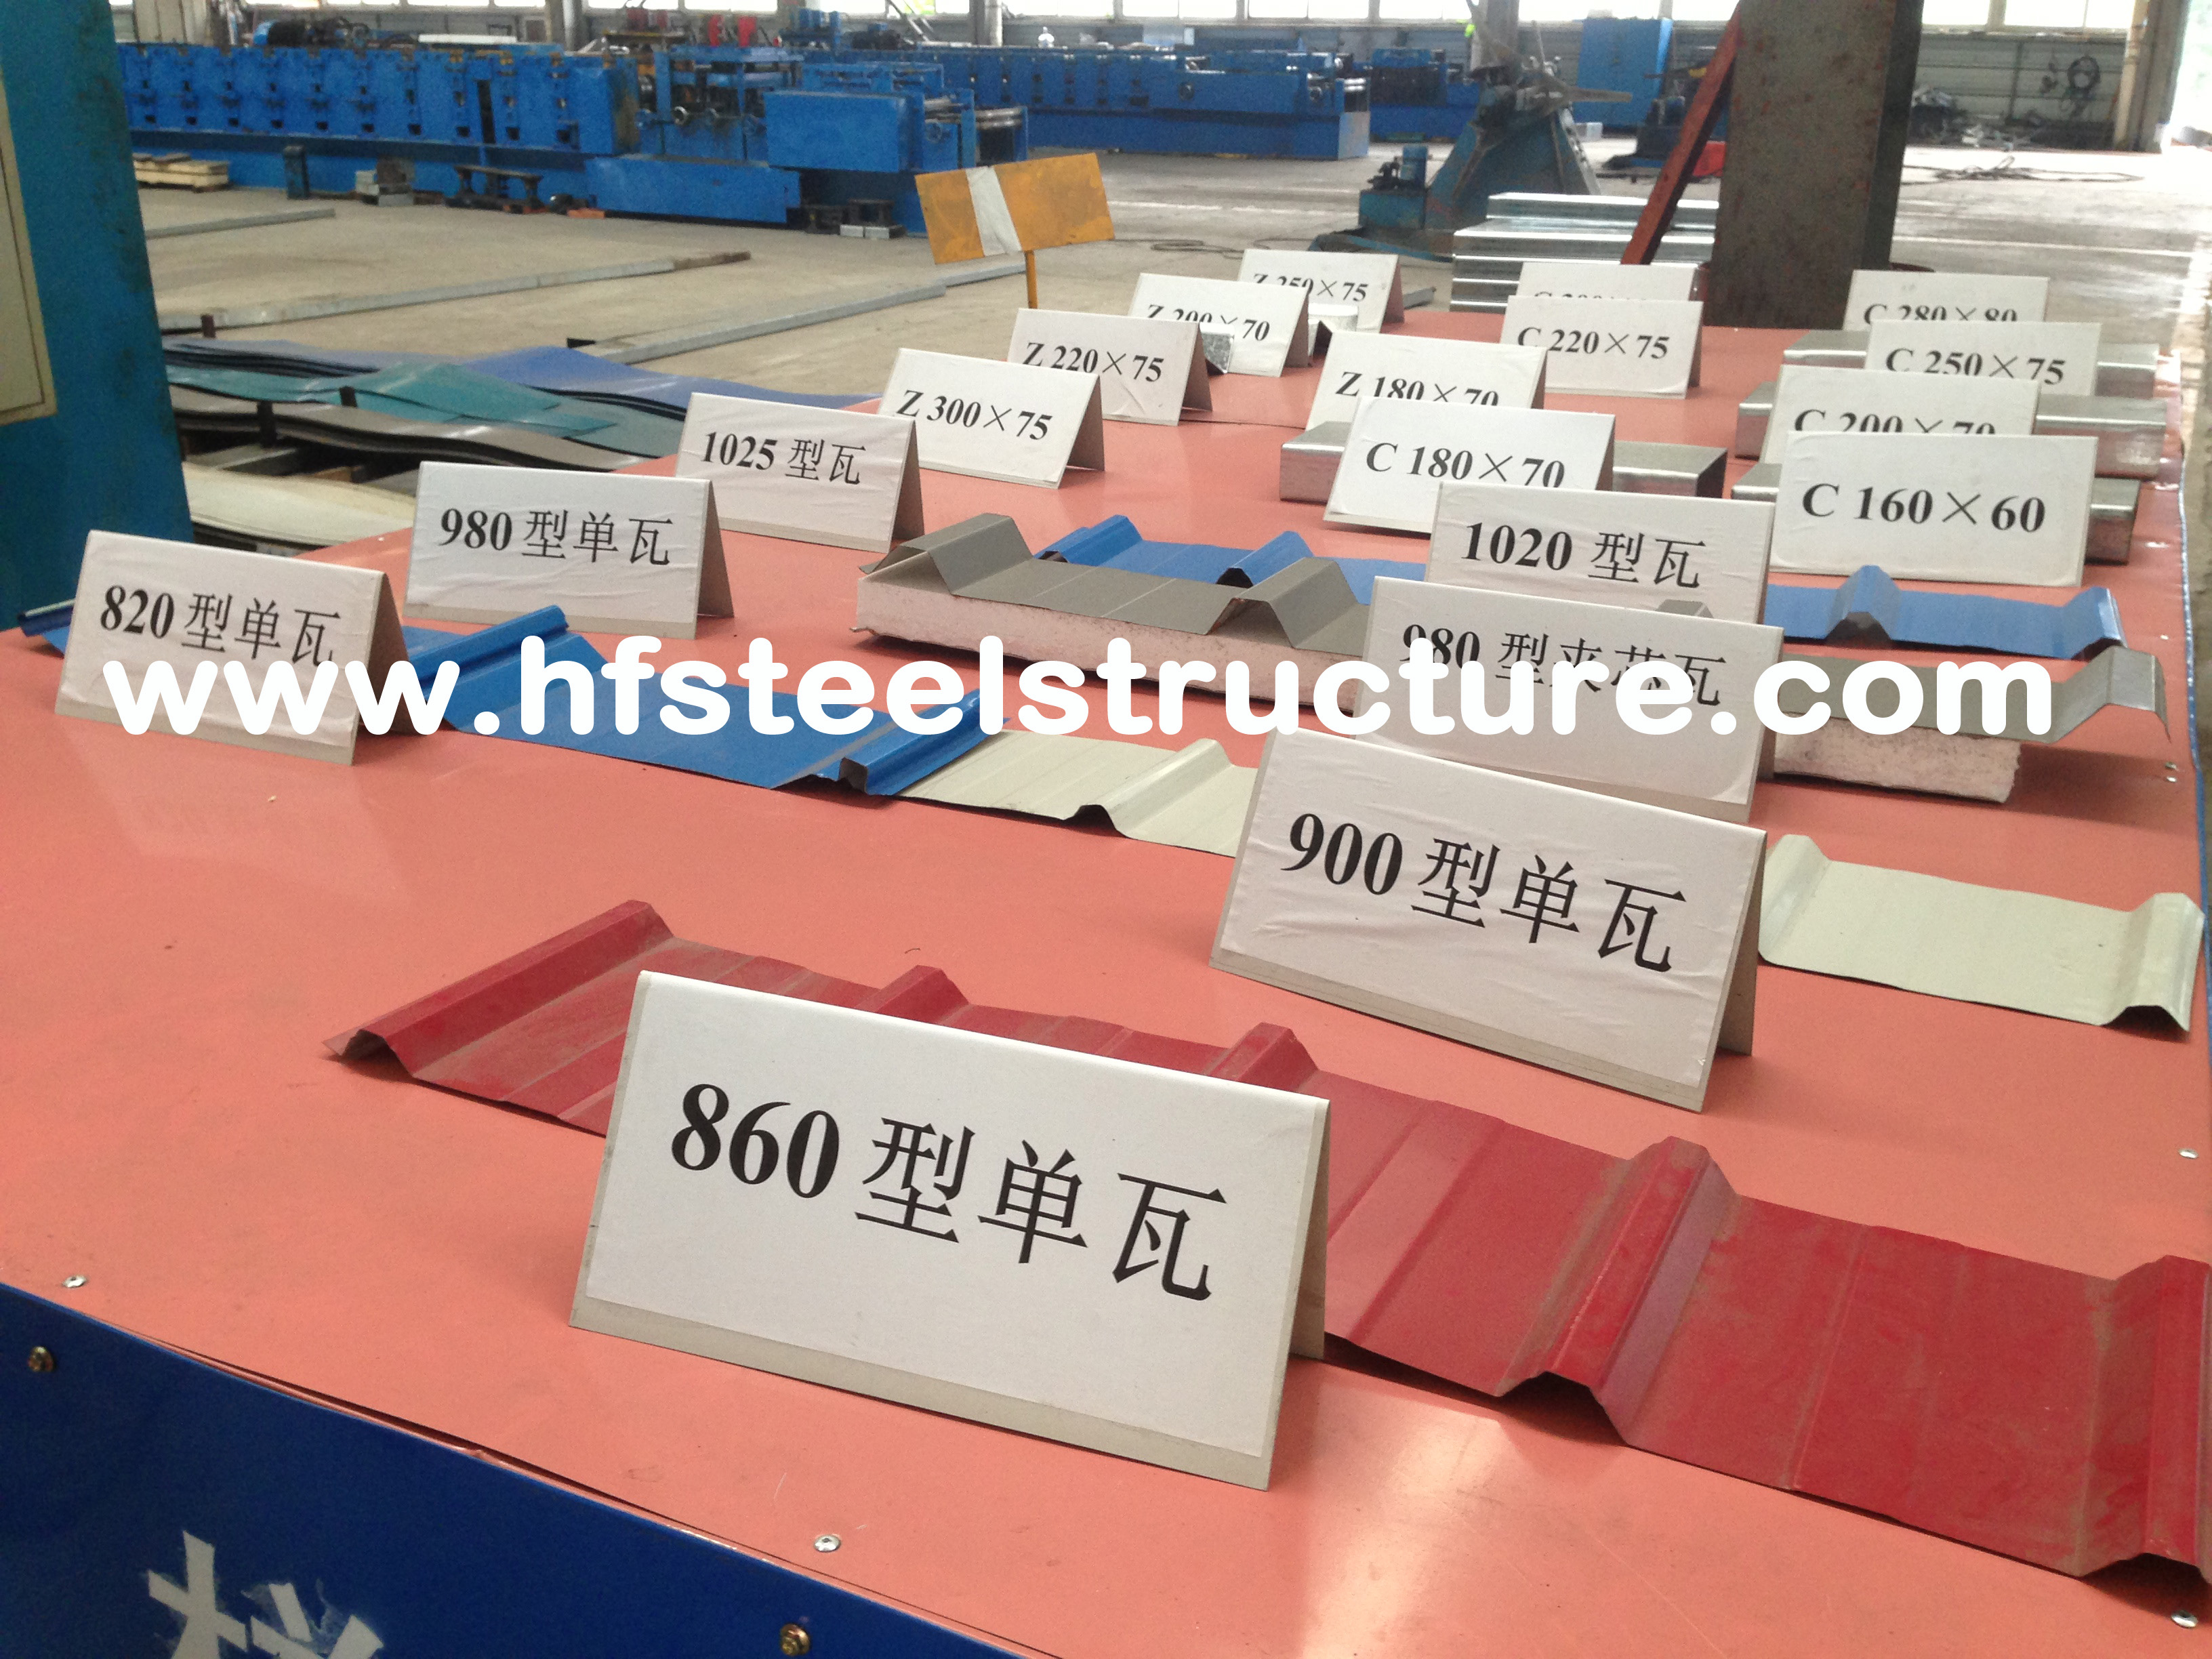 Industrial Metal Roofing Sheets For Wall Of Steel Shed Workshop Factory Building